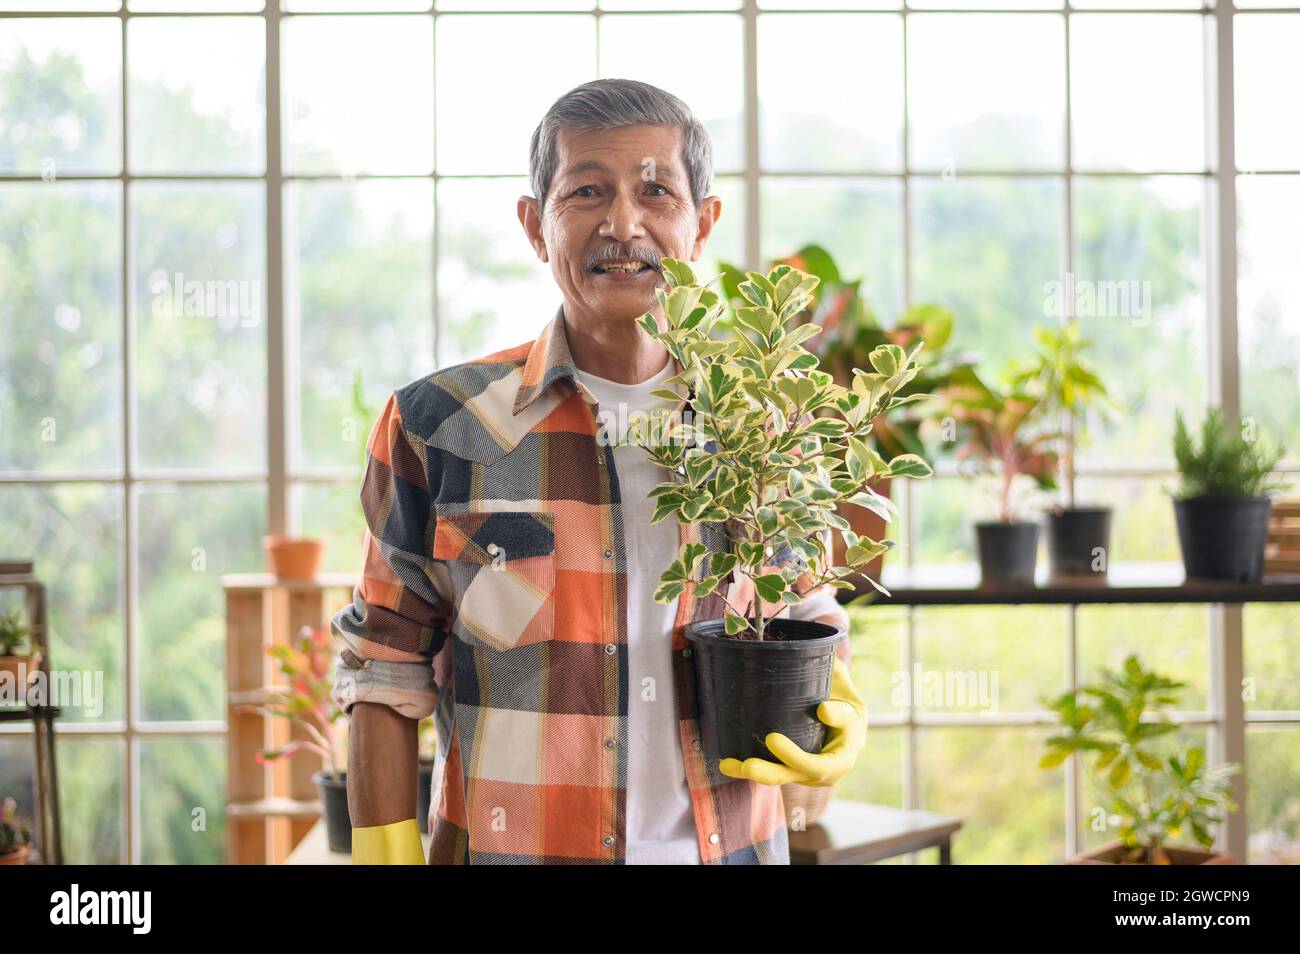 Portrait Of Smiling Senior Man Holding Potted Plant Standing At Greenhouse Stock Photo